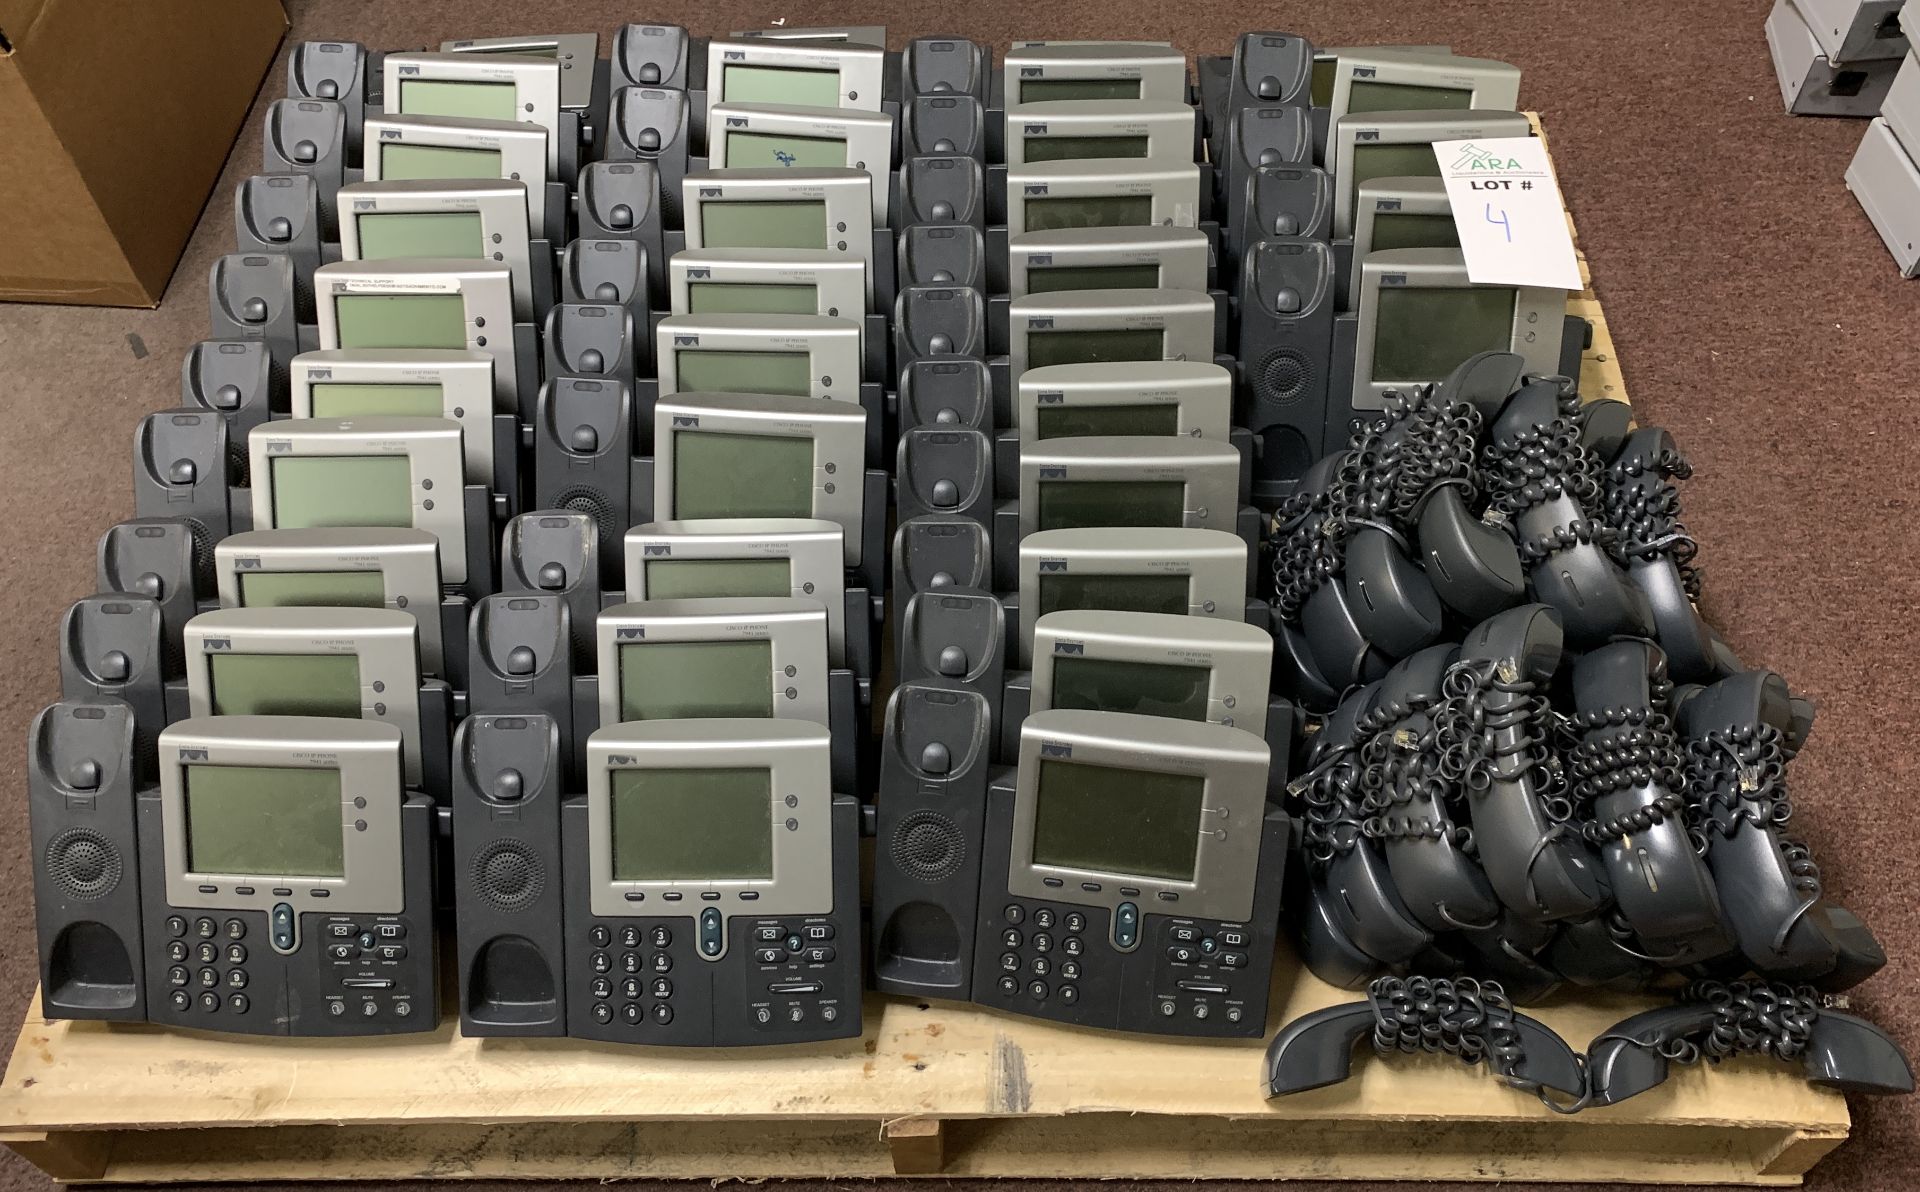 36 CISCO PHONE SYSTEMS - MODEL 7941 - INCLUDING HANDSETS - Image 2 of 4